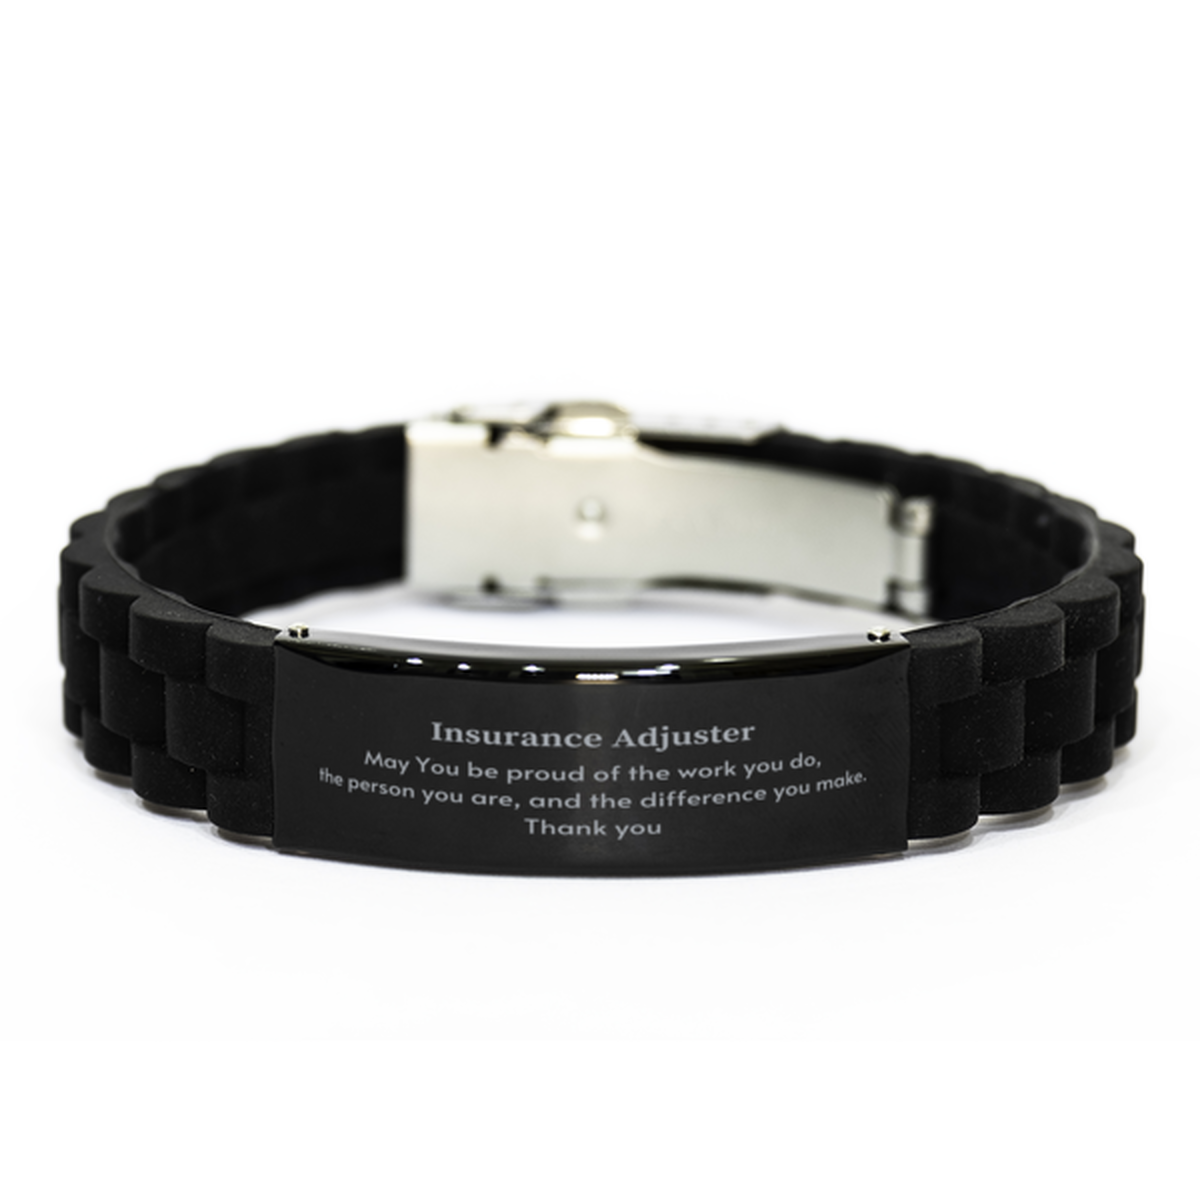 Heartwarming Black Glidelock Clasp Bracelet Retirement Coworkers Gifts for Insurance Adjuster, Insurance Adjuster May You be proud of the work you do, the person you are Gifts for Boss Men Women Friends